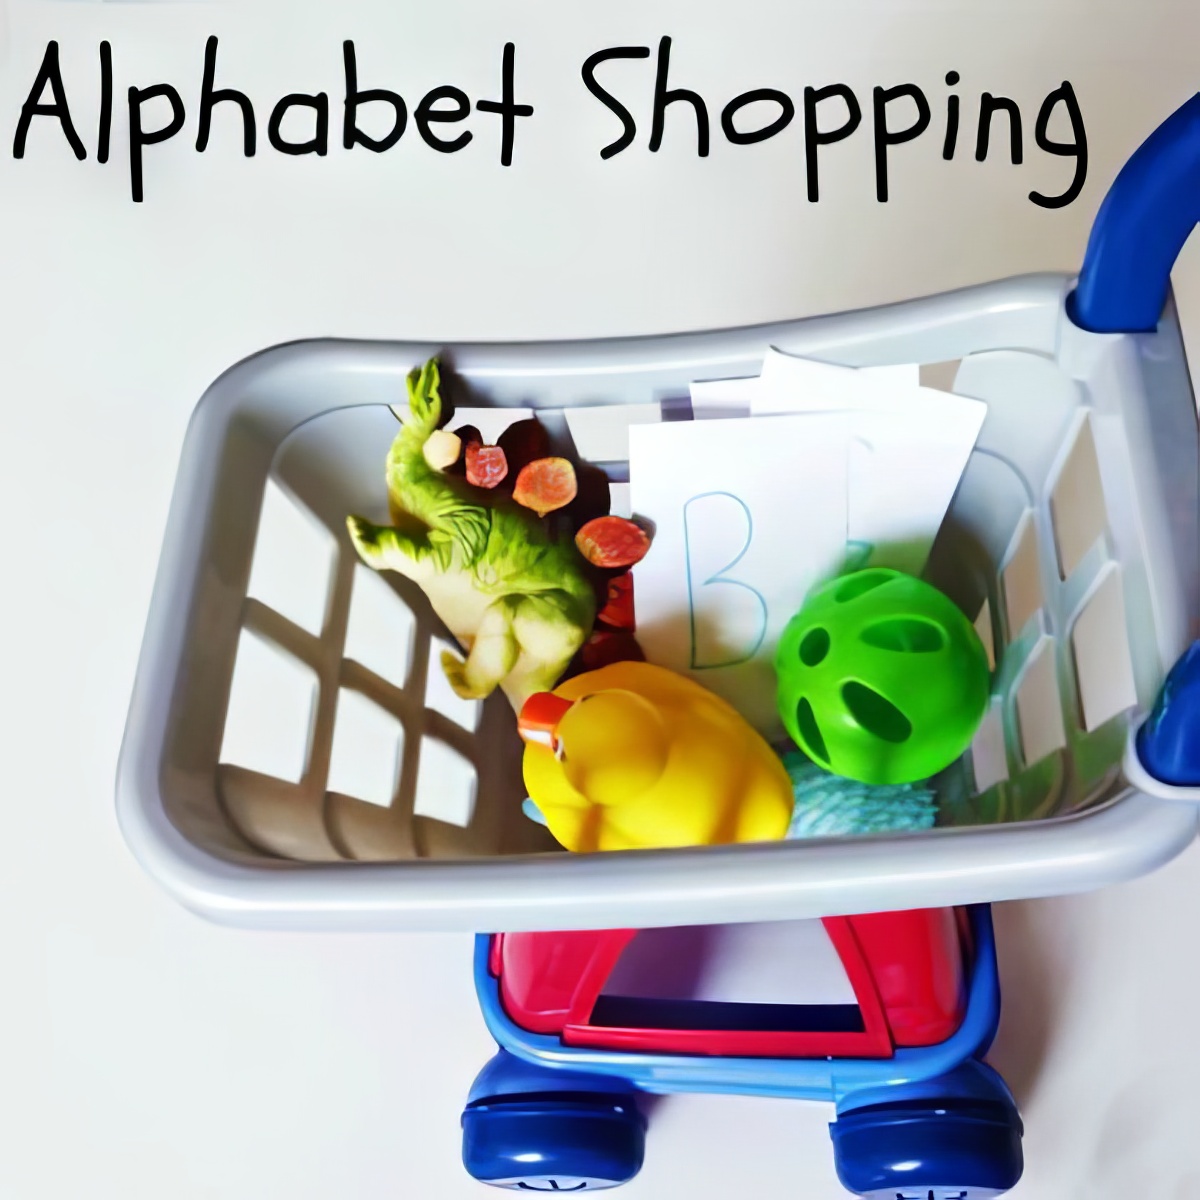 Alphabet Shopping, Phonics Games and Activities for toddlers, phonics activities for your kids